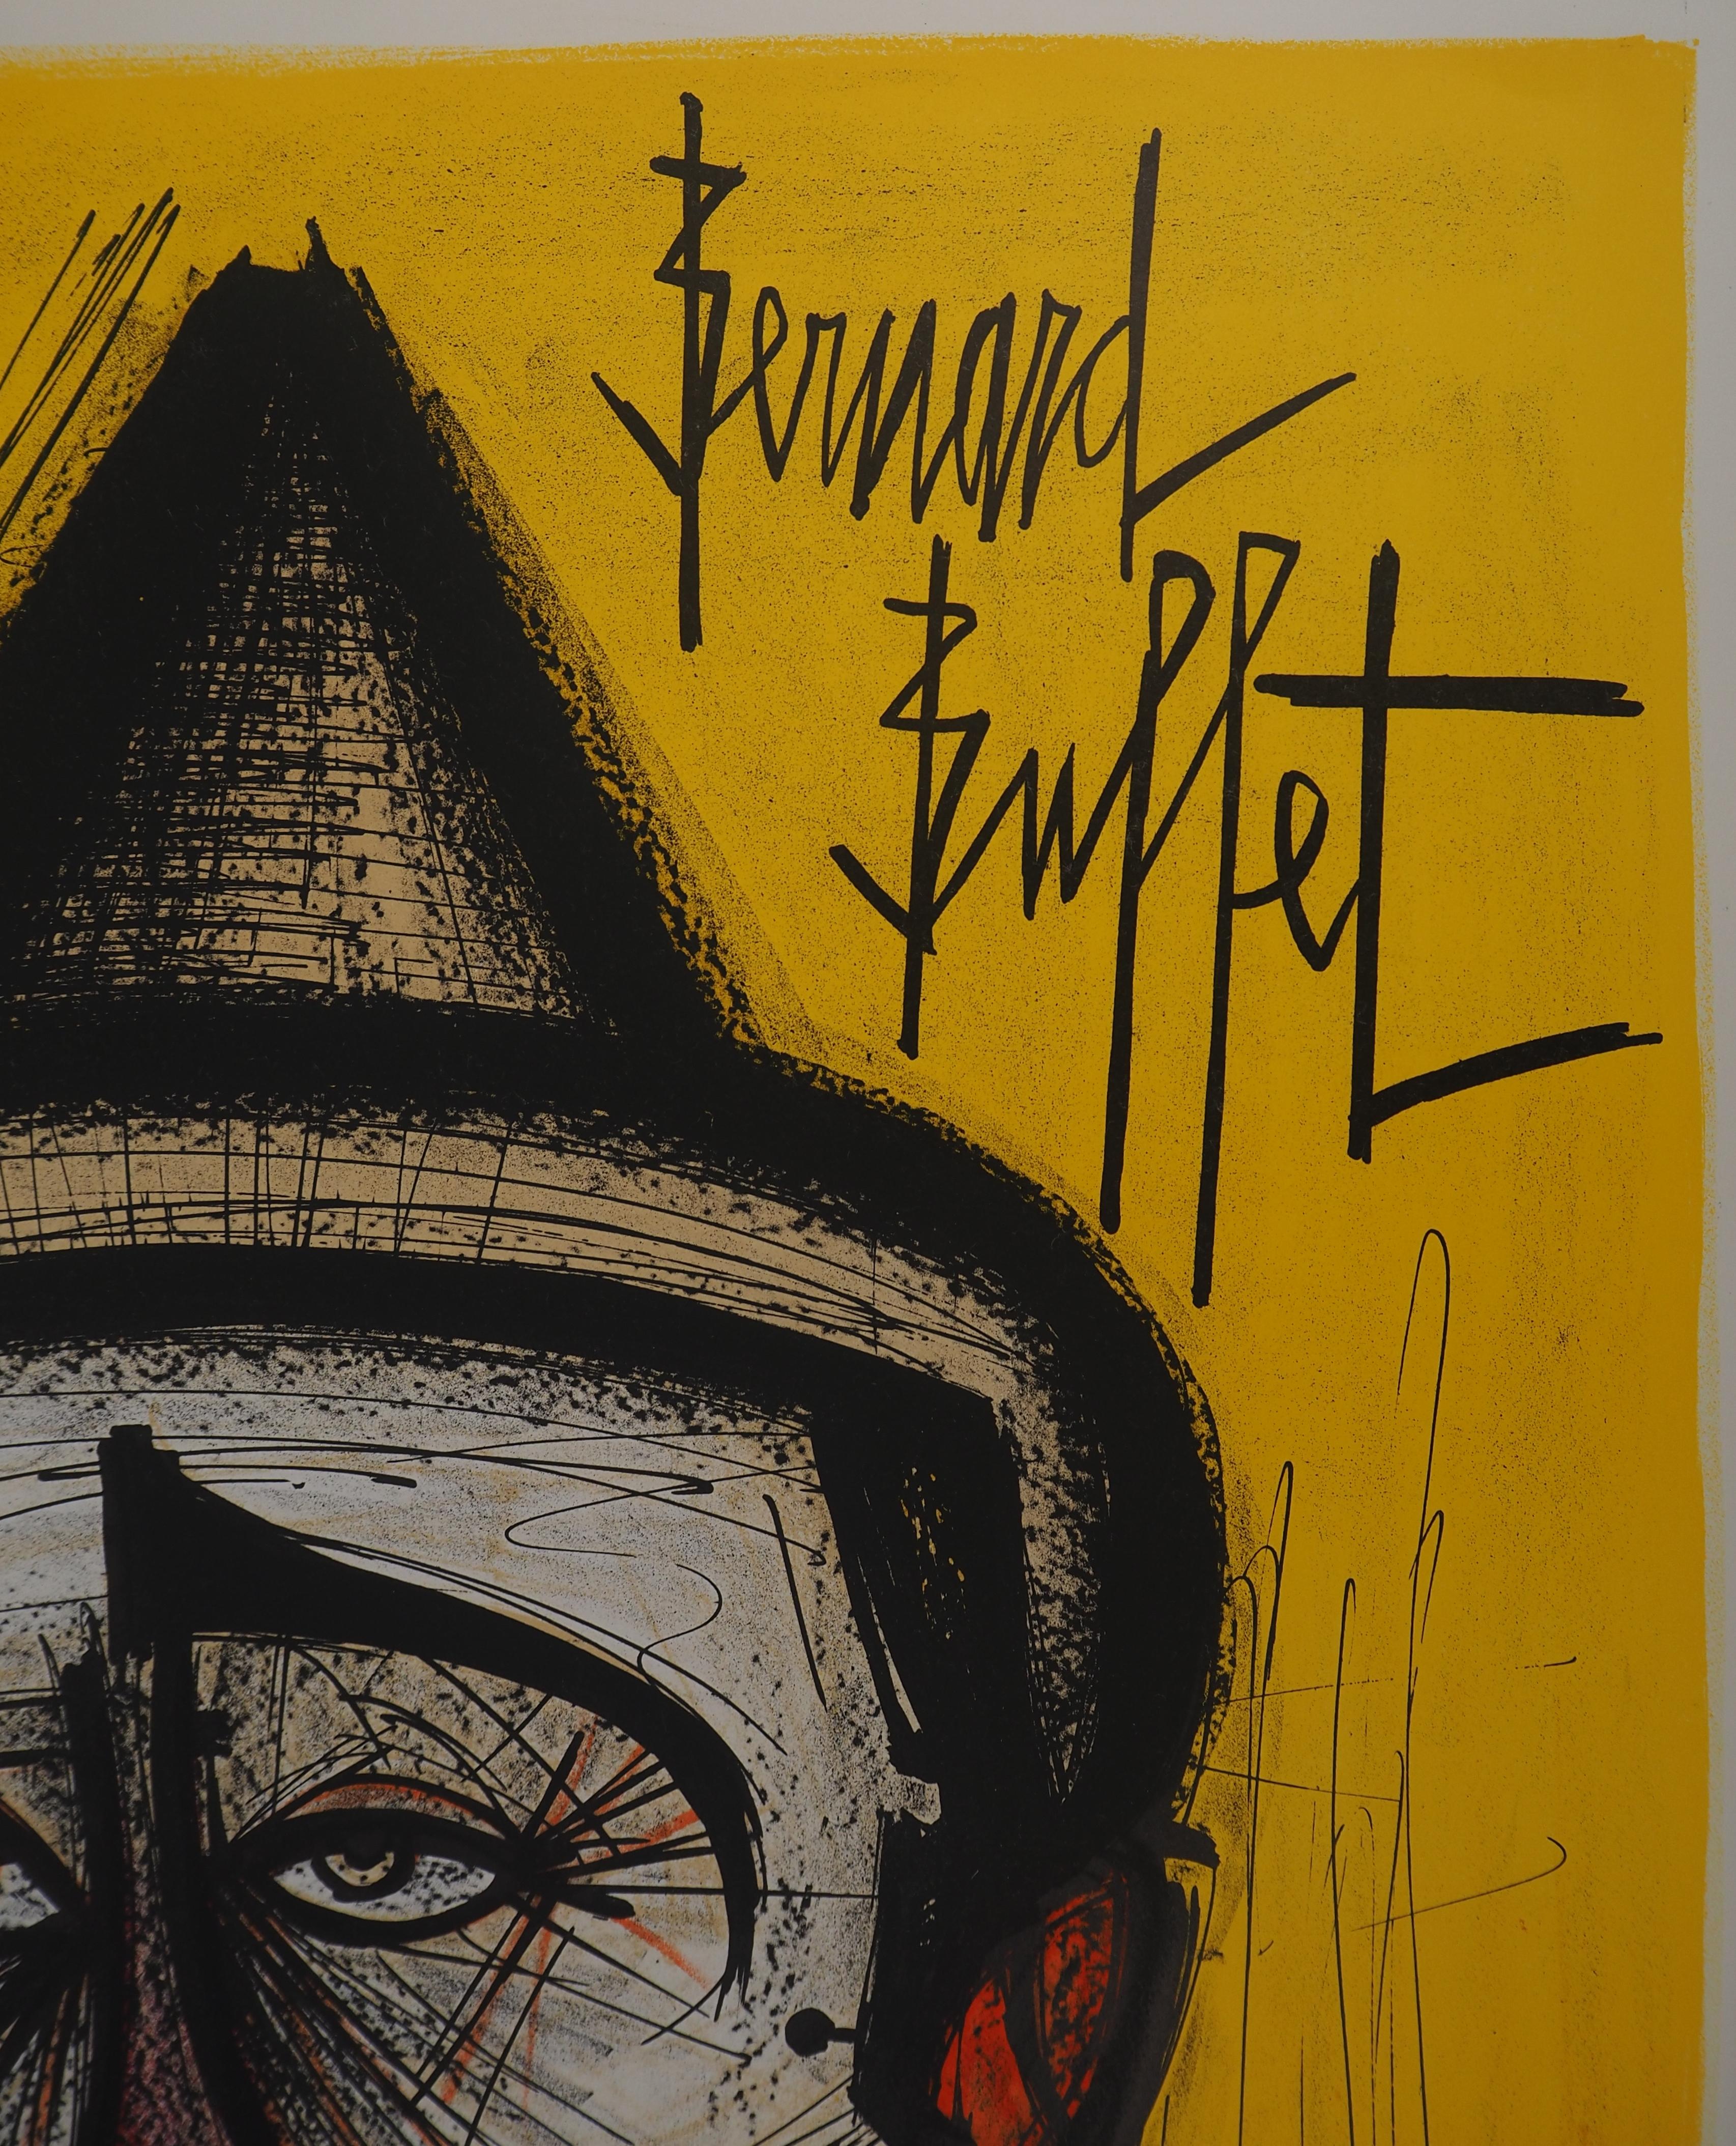 Bernard BUFFET
Circus : The Clown

Original lithograph (Mourlot workshop)
Printed signature in the plate
On paper 68 x 52 cm (c. 27 x 21 in)

REFRENCES : Catalogue raisonne Bernard Buffet Lithographe vol 1, page 109, reference #139b

Excellent